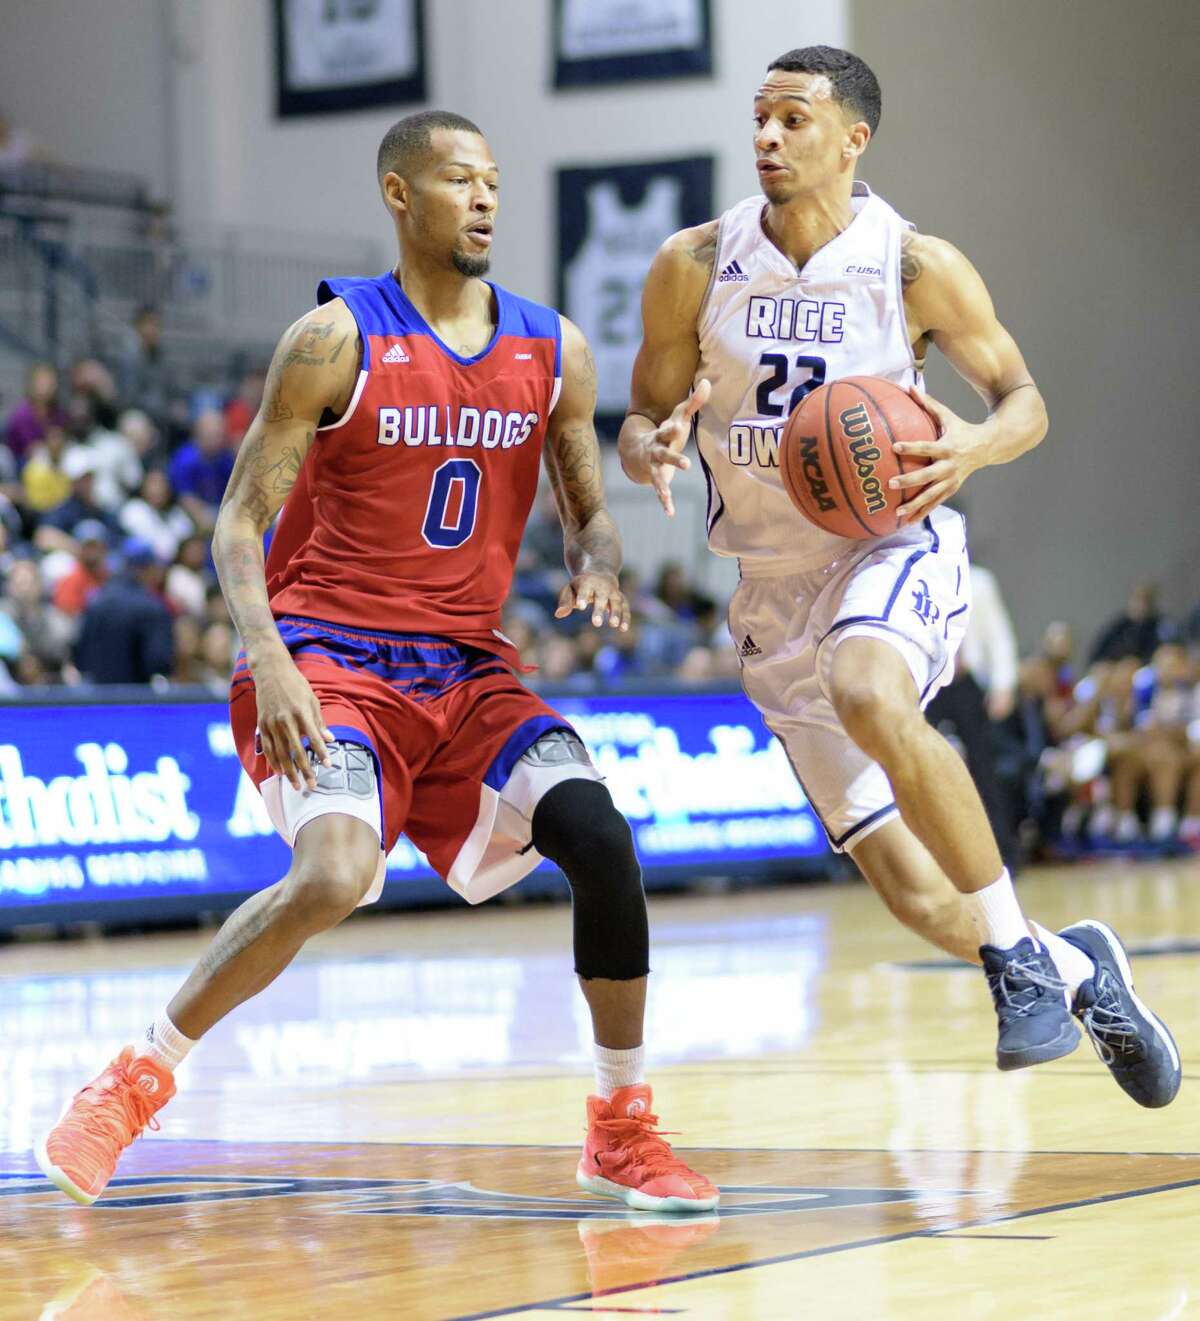 Marcus Jackson (22) of the Rice Owls brings the ball up the court with Jocobi Boykins (0) of the Louisiana Tech Bulldogs defending in a college basketball game on Saturday, February 25, 2017 at Tudor Fieldhouse on Rice Campus.